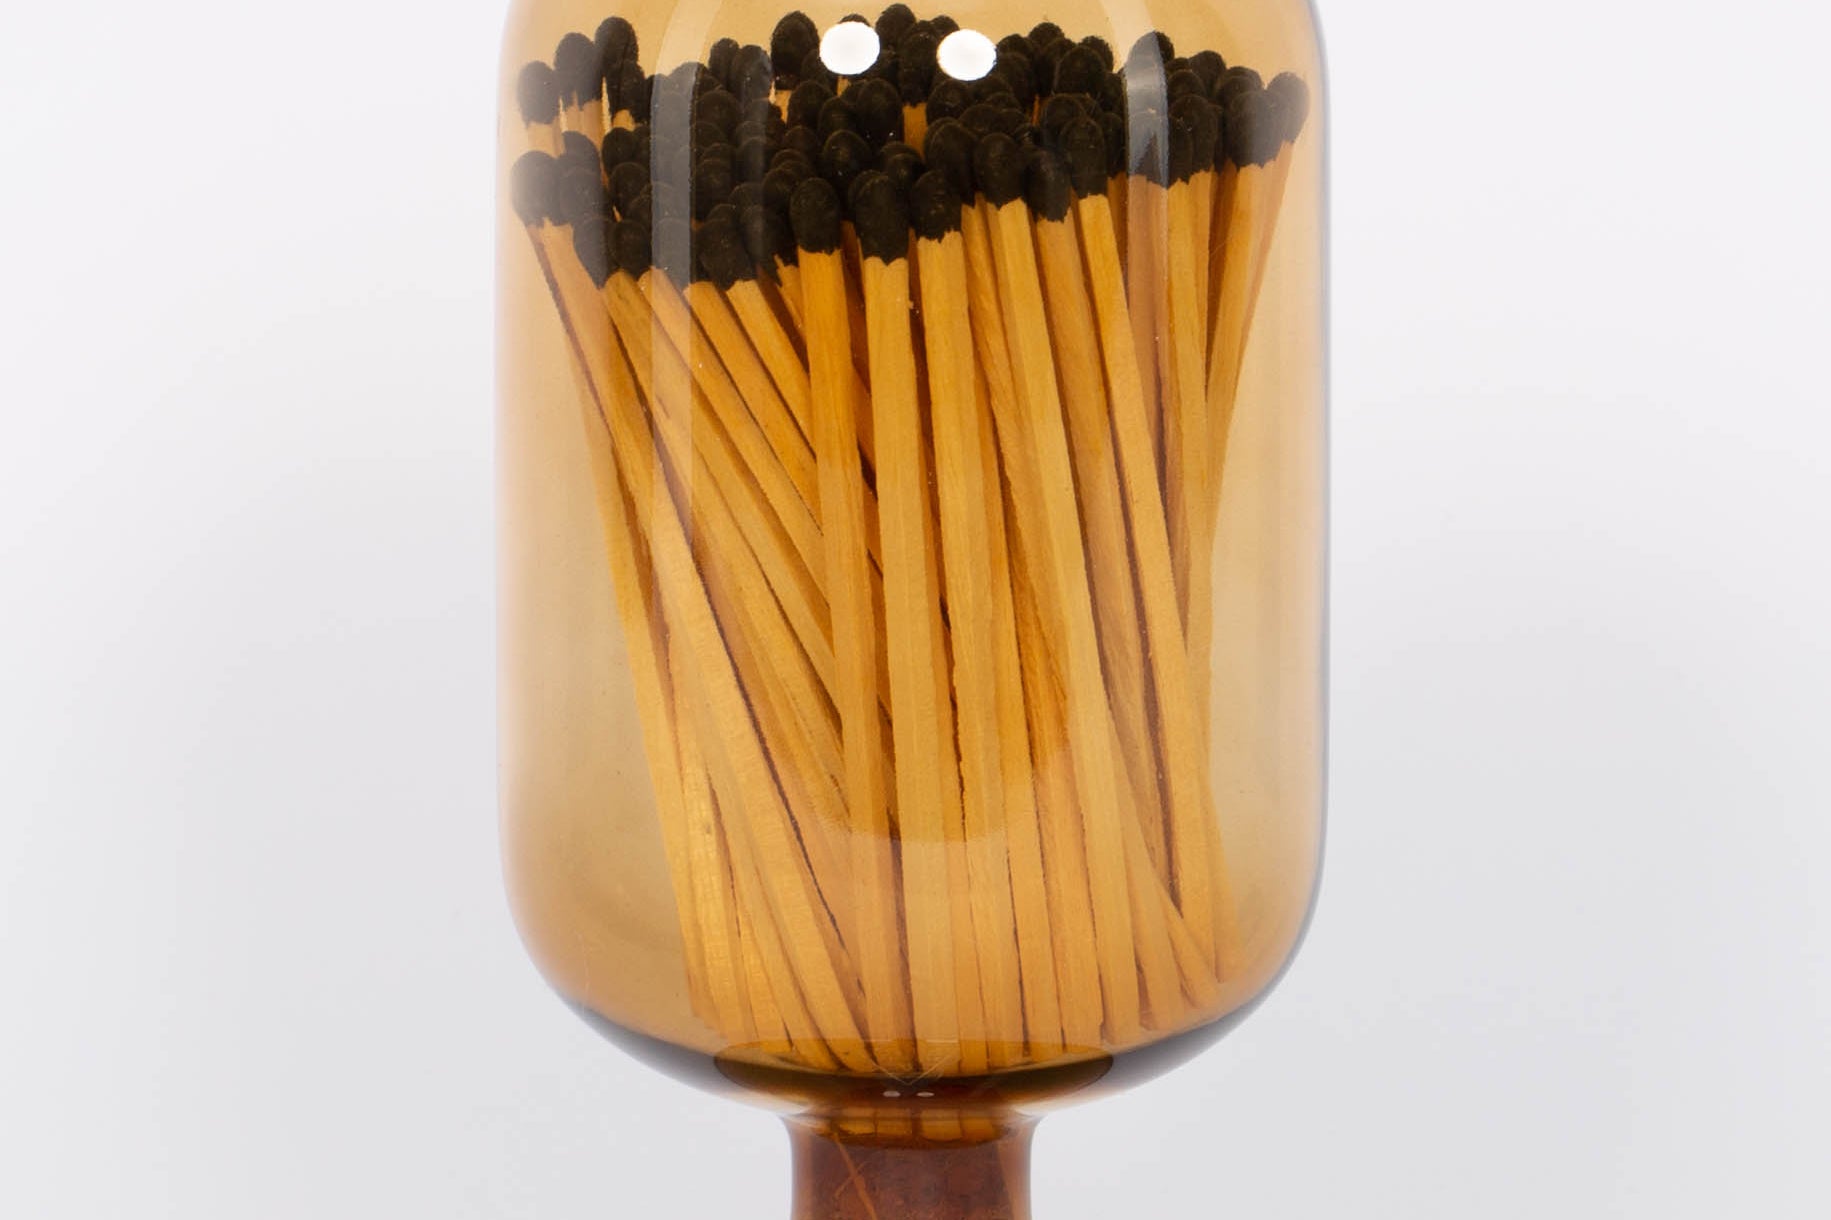 Amber Match Cloche by Skeem in jewel-toned vintage glass domes fitted with cork, holding 120 matches. White background.